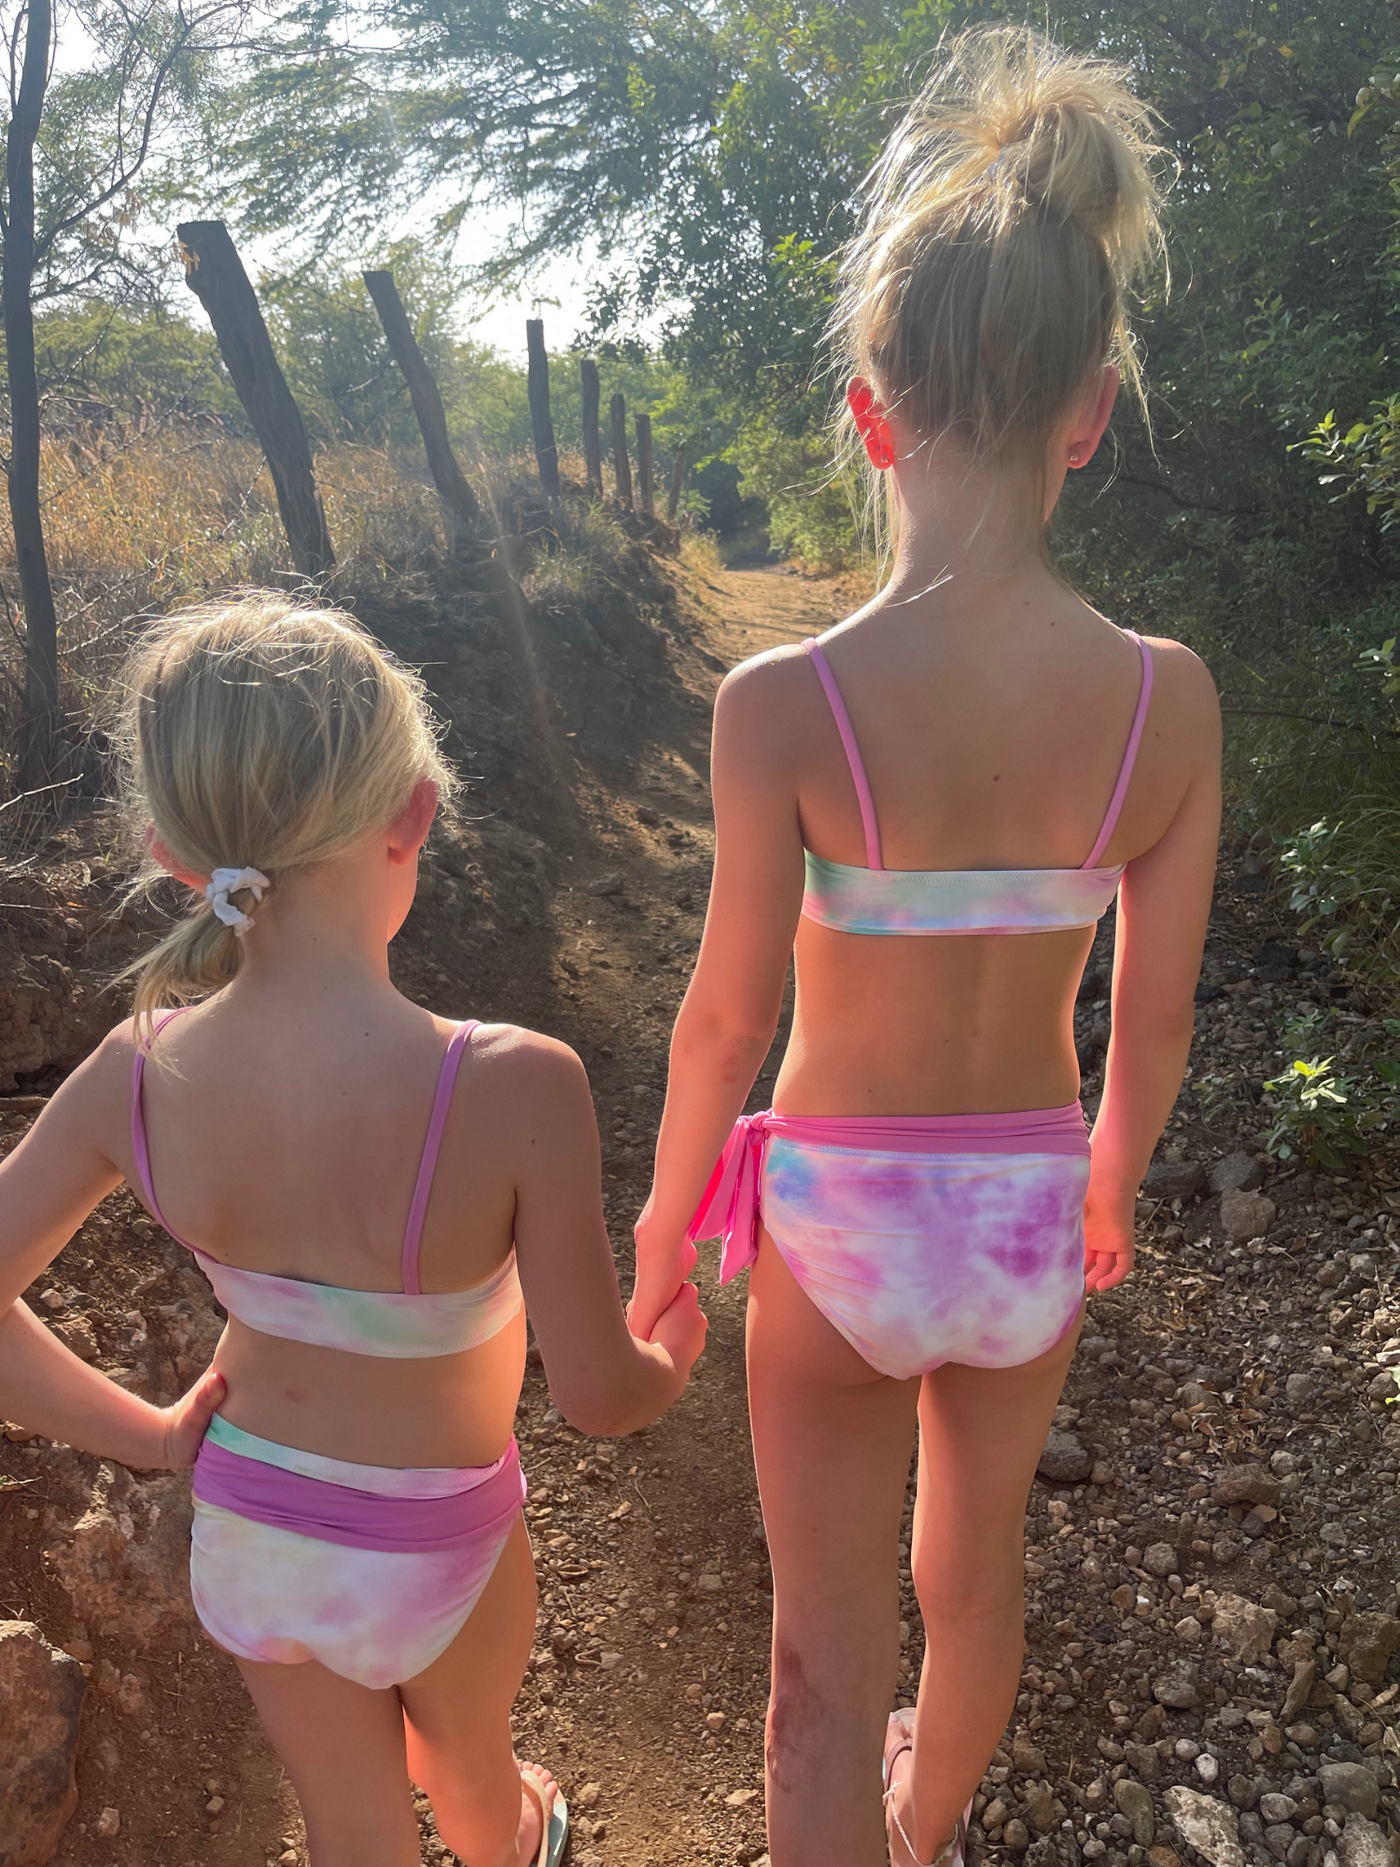 Navalora Matching Swimsuits Mommy and Me Girl's Cotton Candy Tie Dye Bikini Family Matching Swimsuit